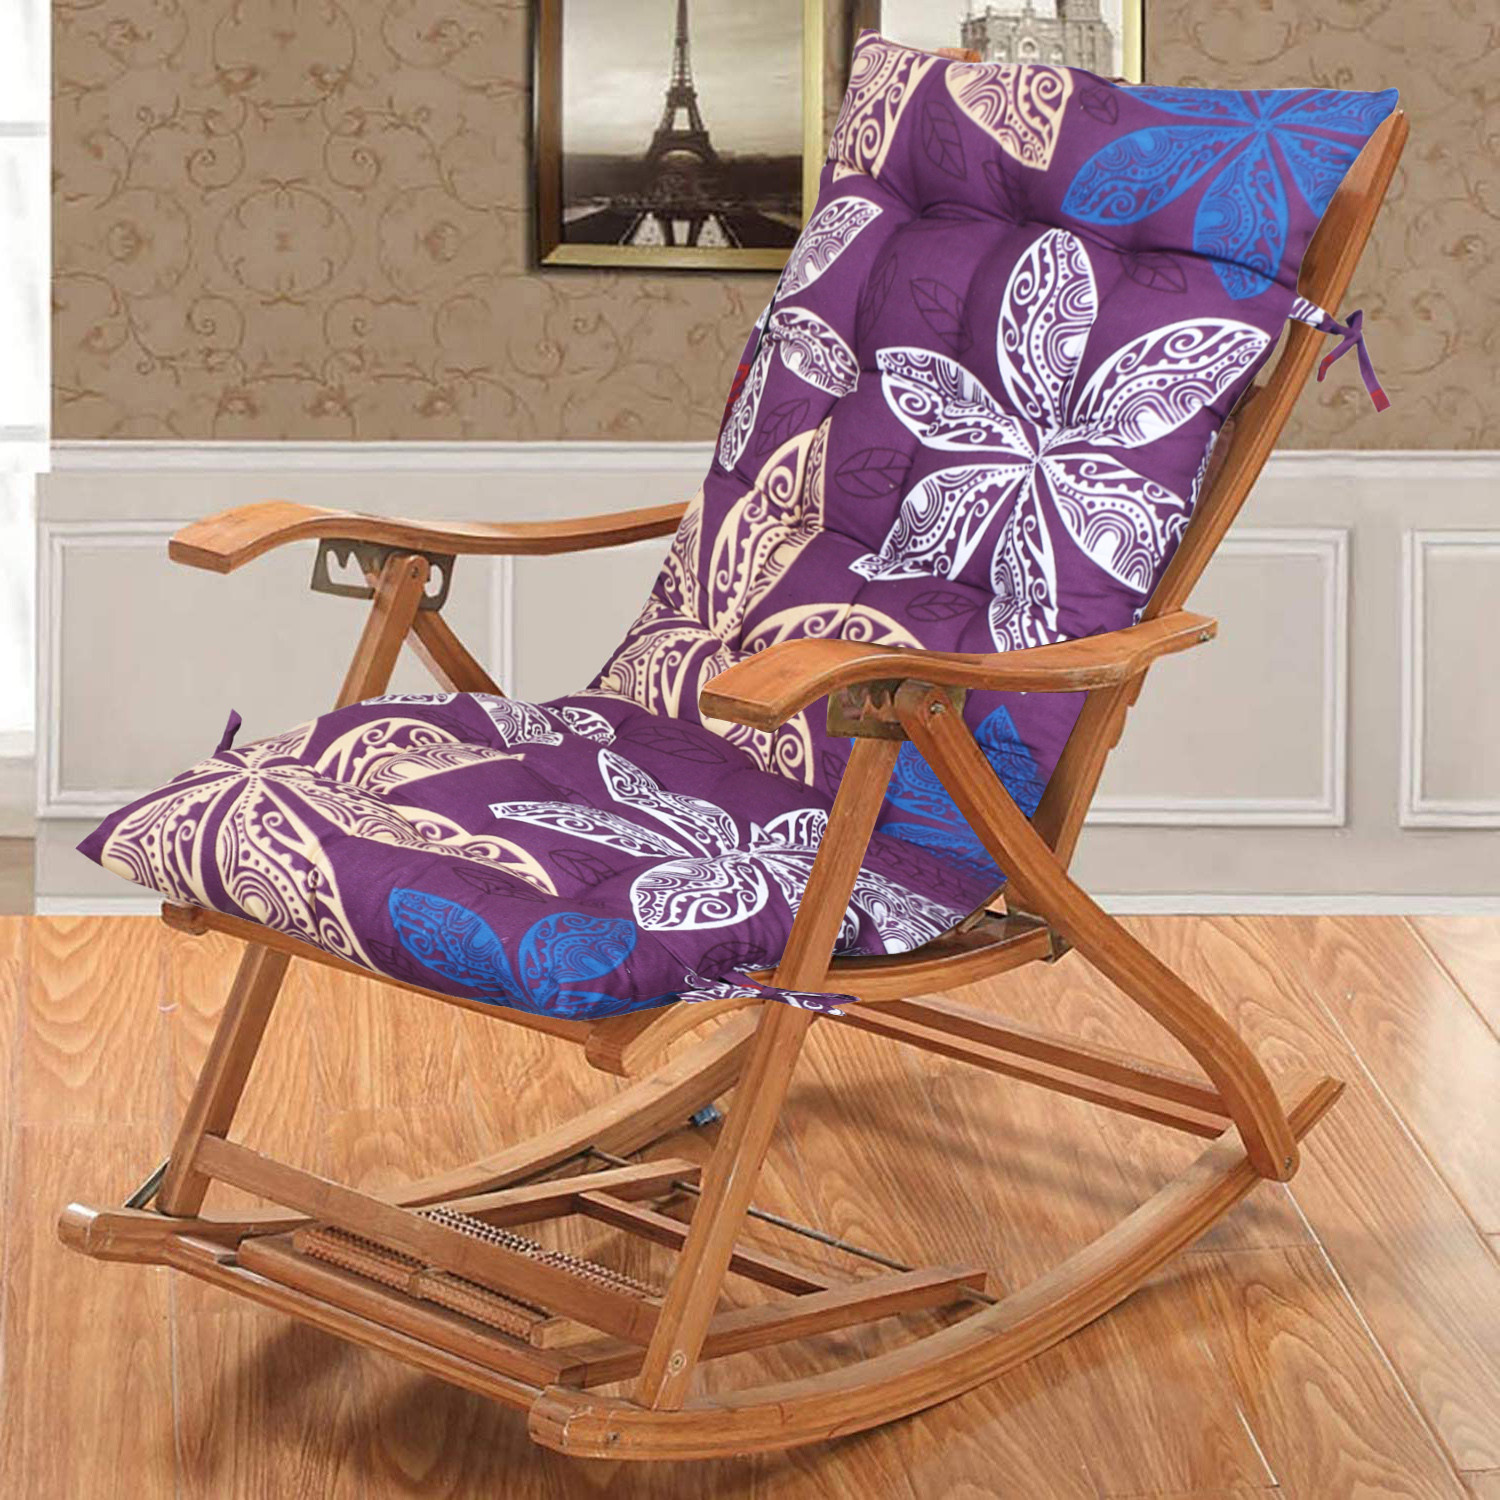 Kuber Industries Long Chair pad | Glance Cotton Long Seat Cushion | Rocking Chair Cushions | Chair Back Rest Pillow | Flower Chair pad for Meditation | Living Room | Purple